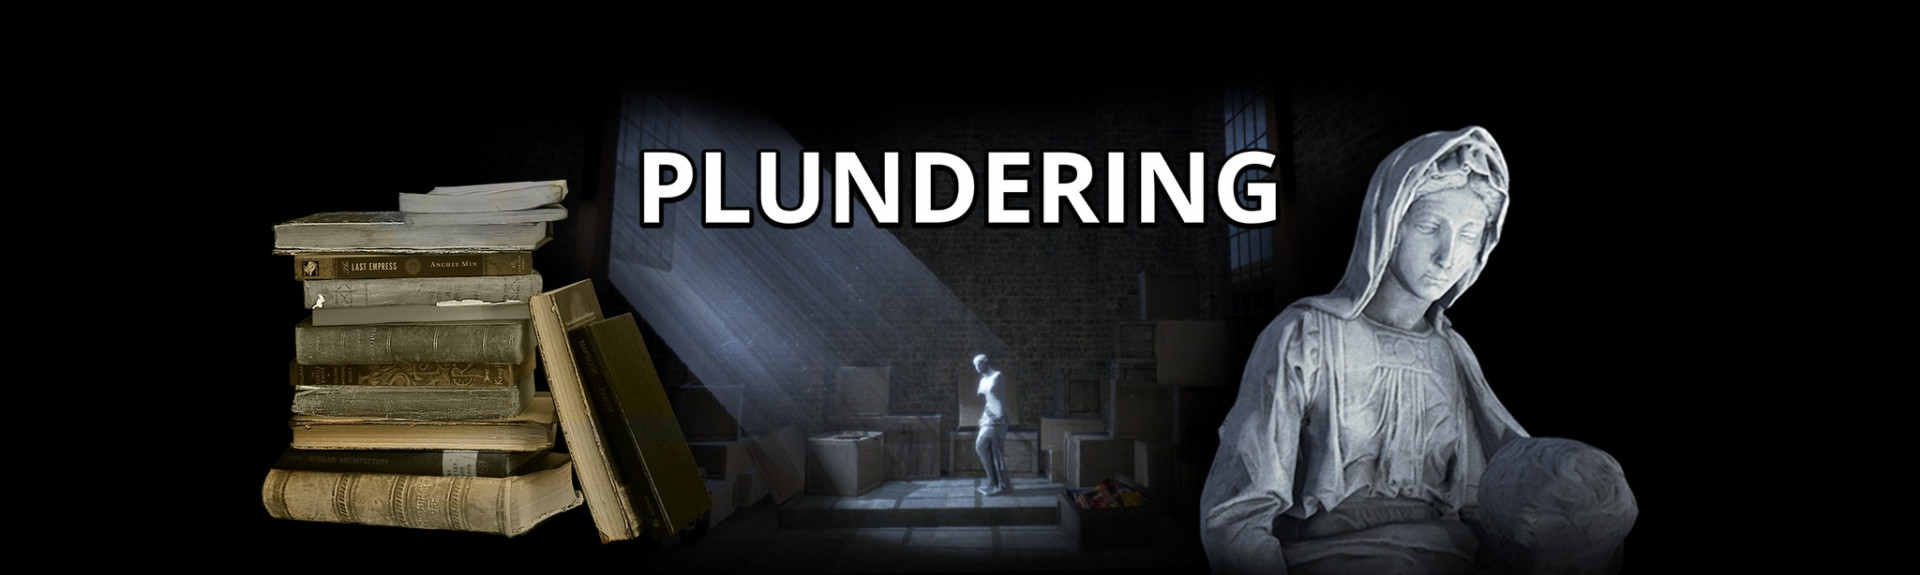 Plundering - the beginning of a genocide